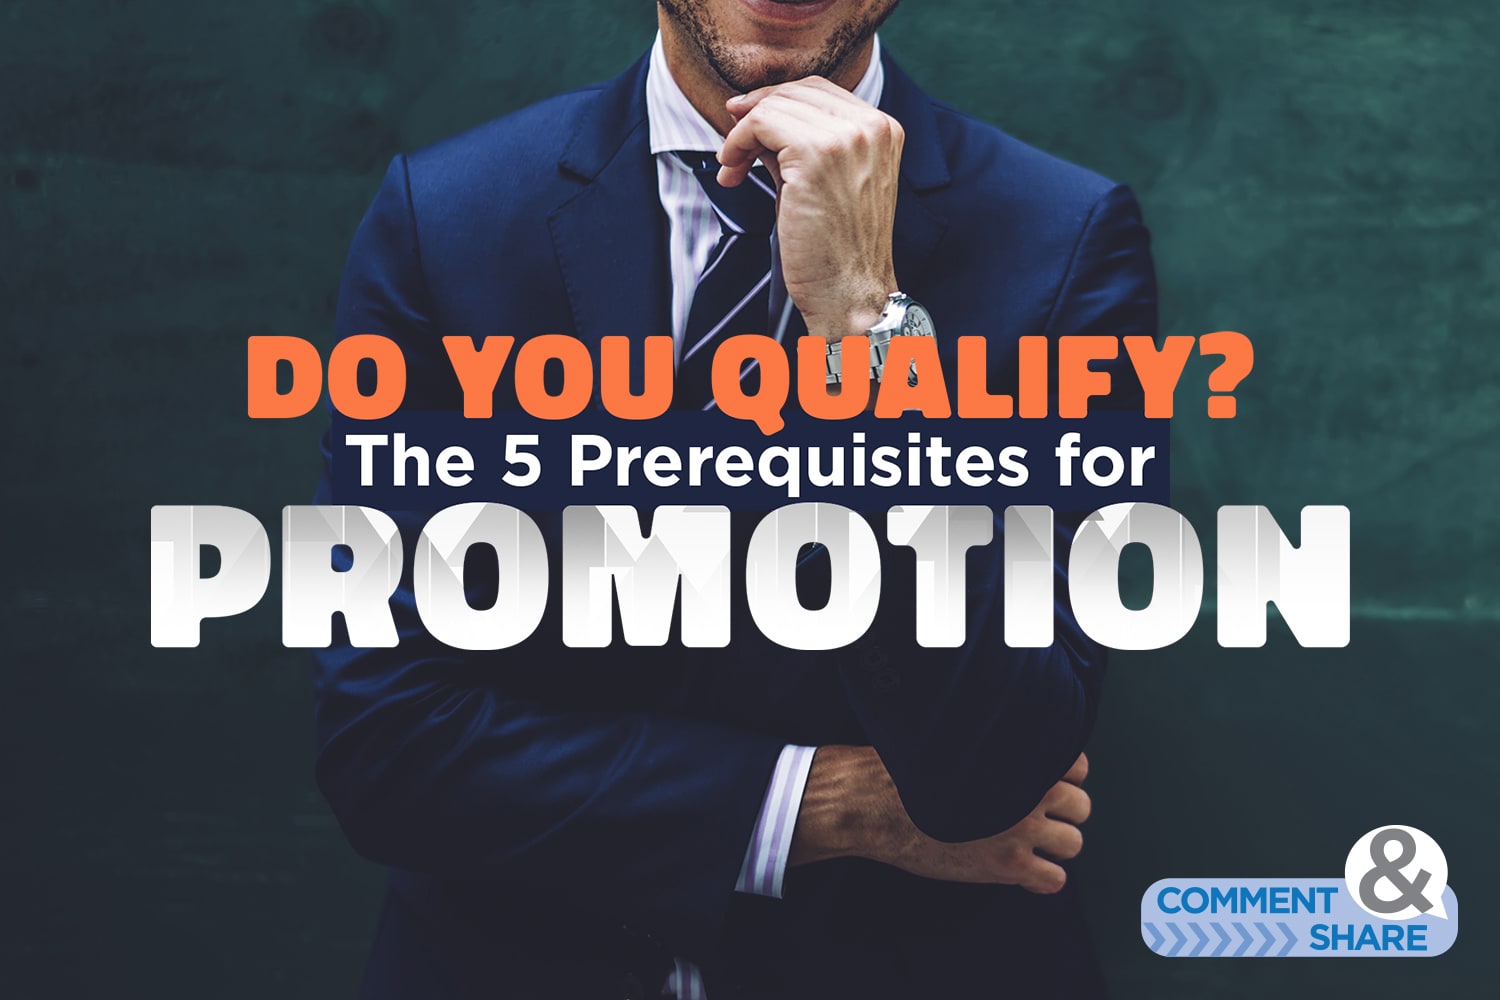 5 Prerequisites for Promotion